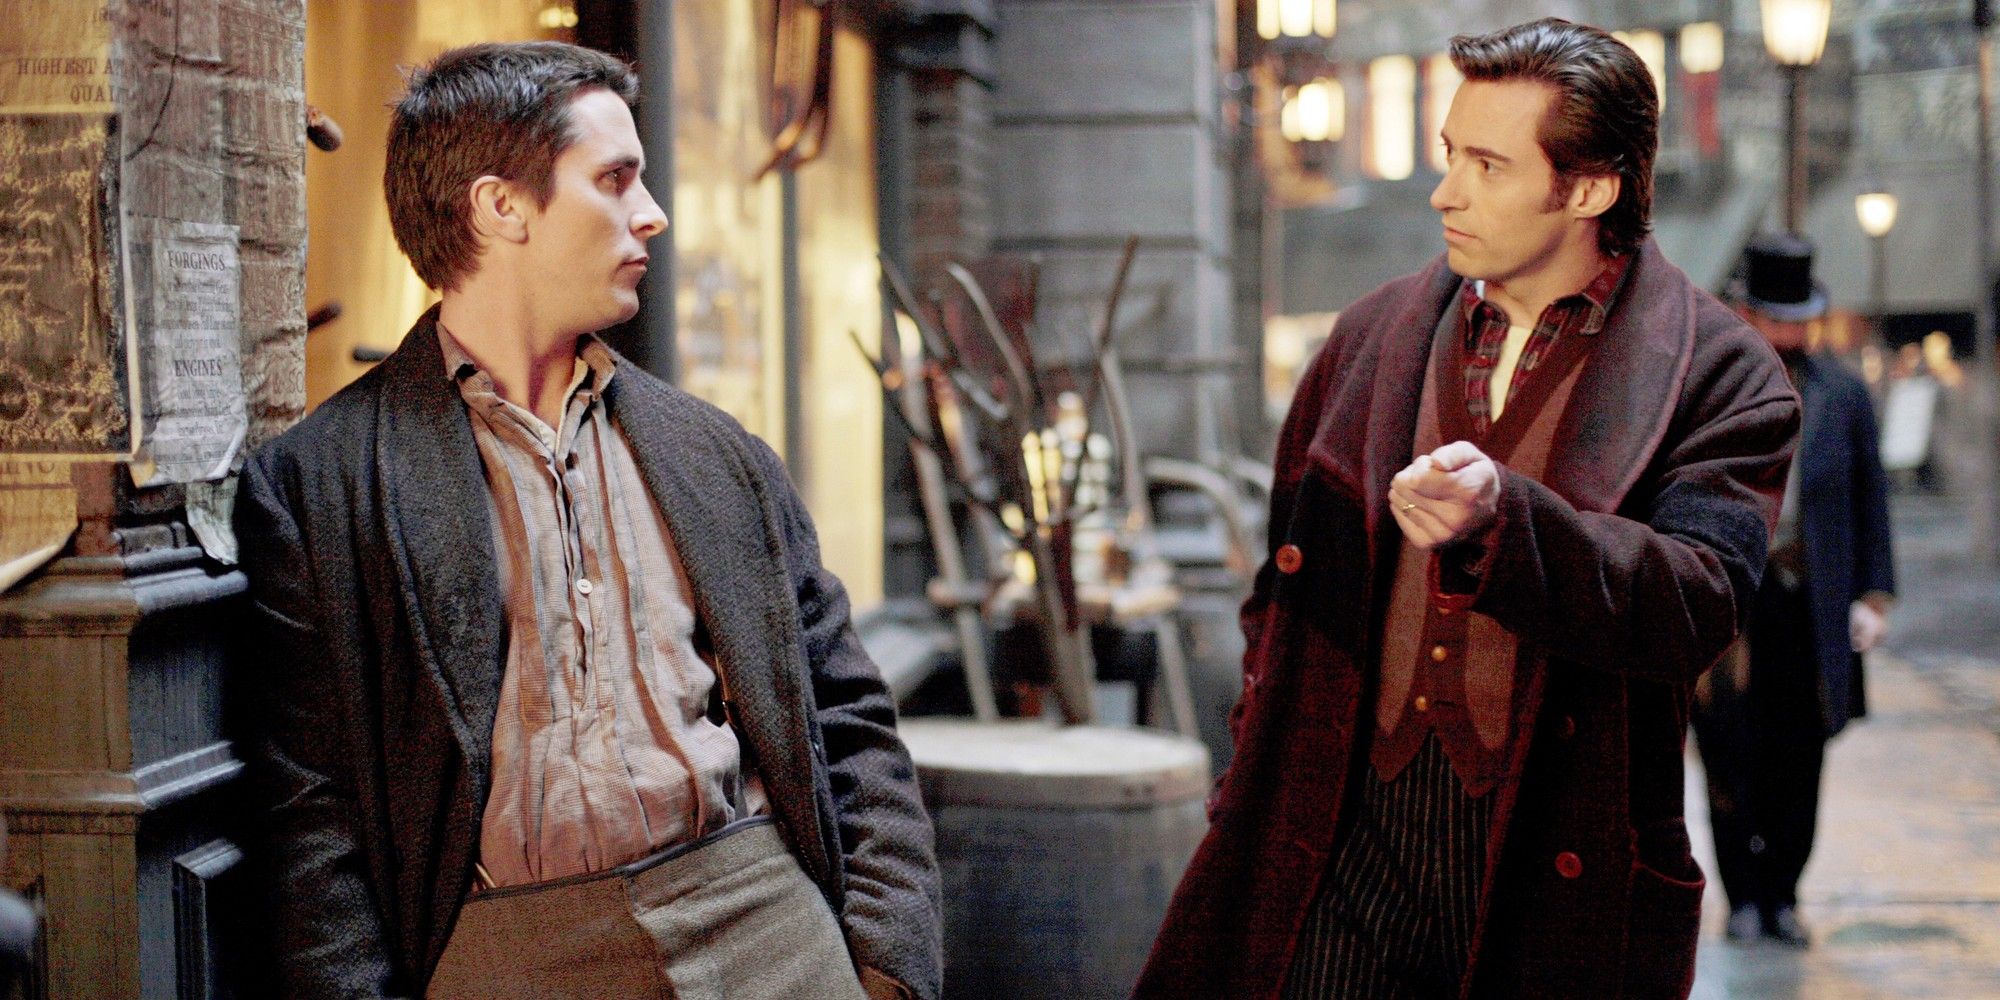 Christian Bale and Hugh Jackman talking on the street in The Prestige